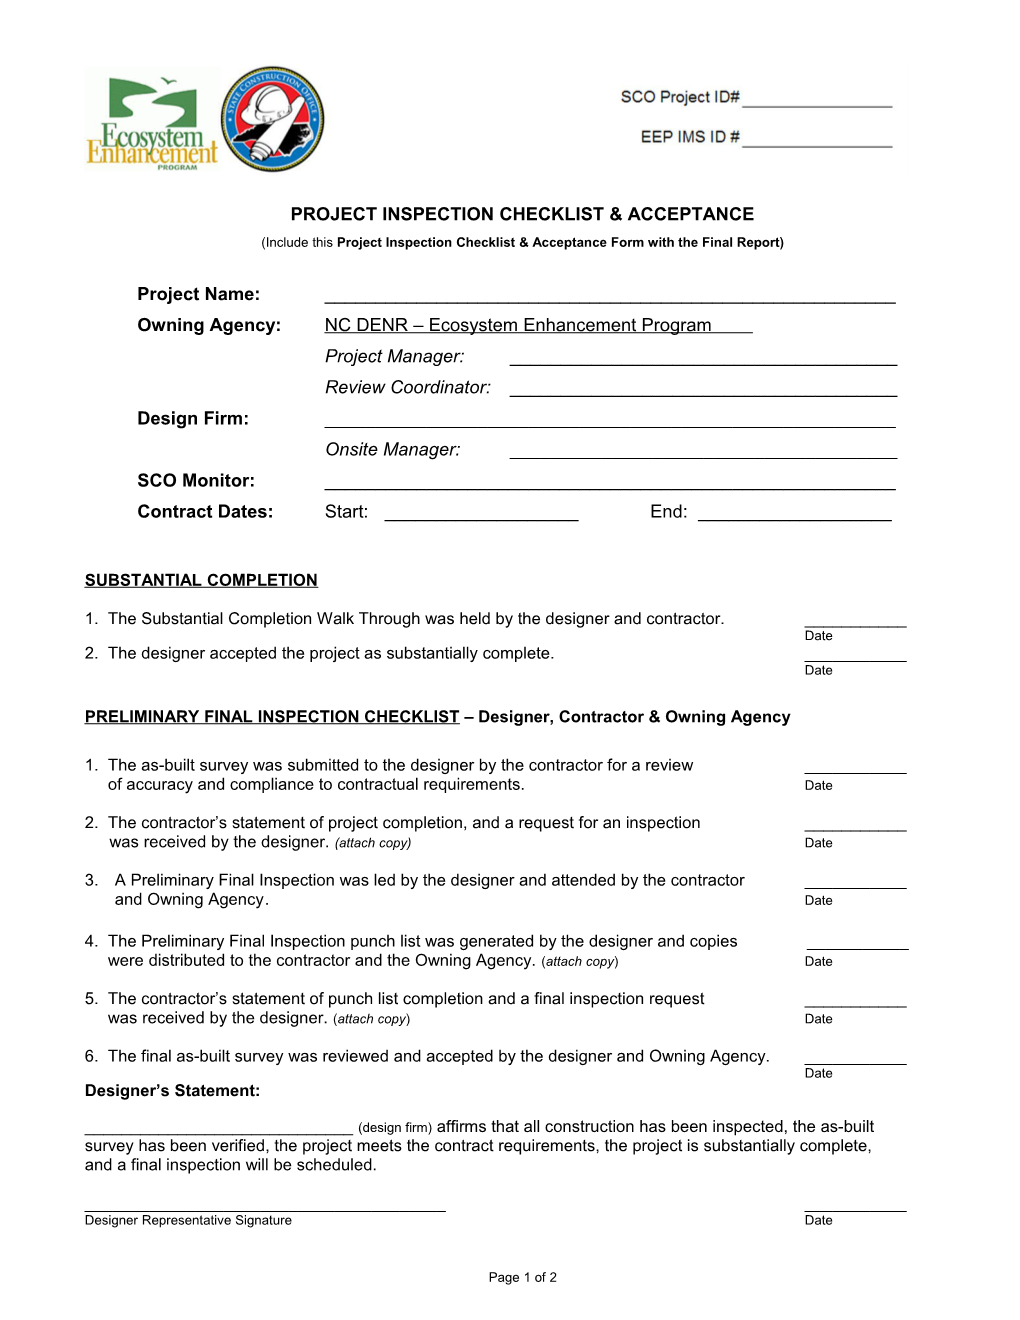 Project Inspection Checklist and Acceptance Form